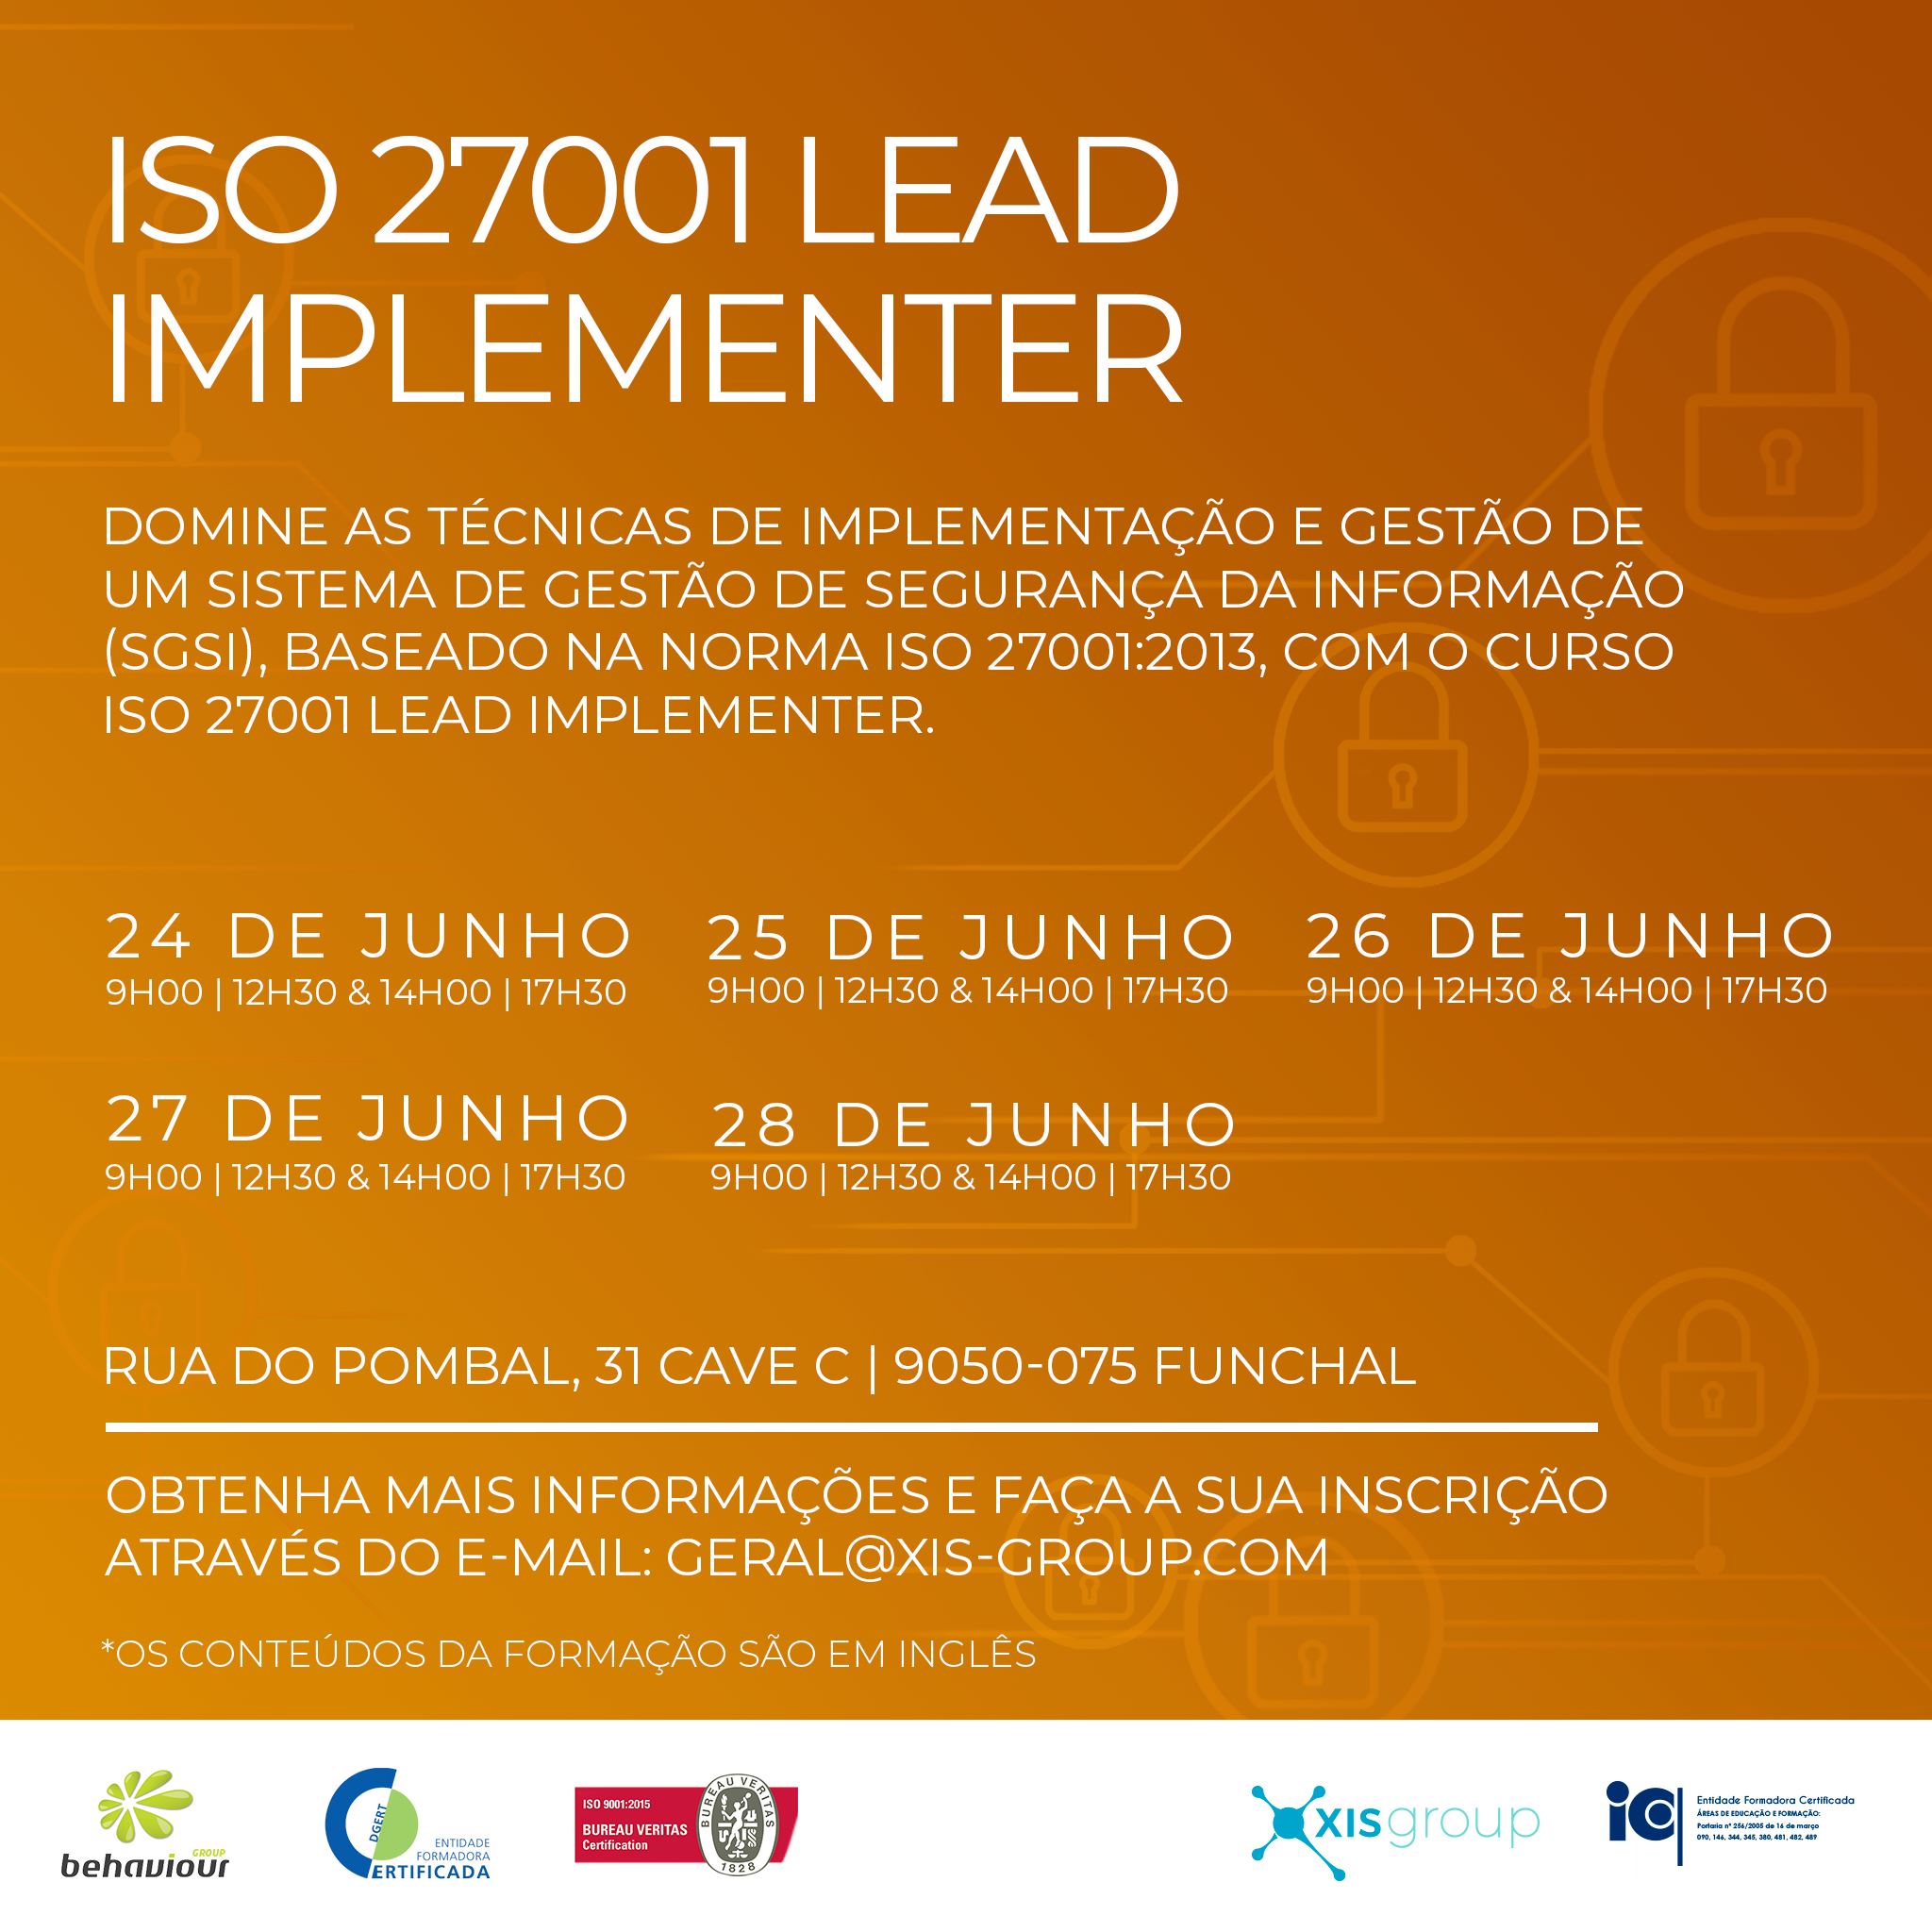 ISO 27001 lead implementer